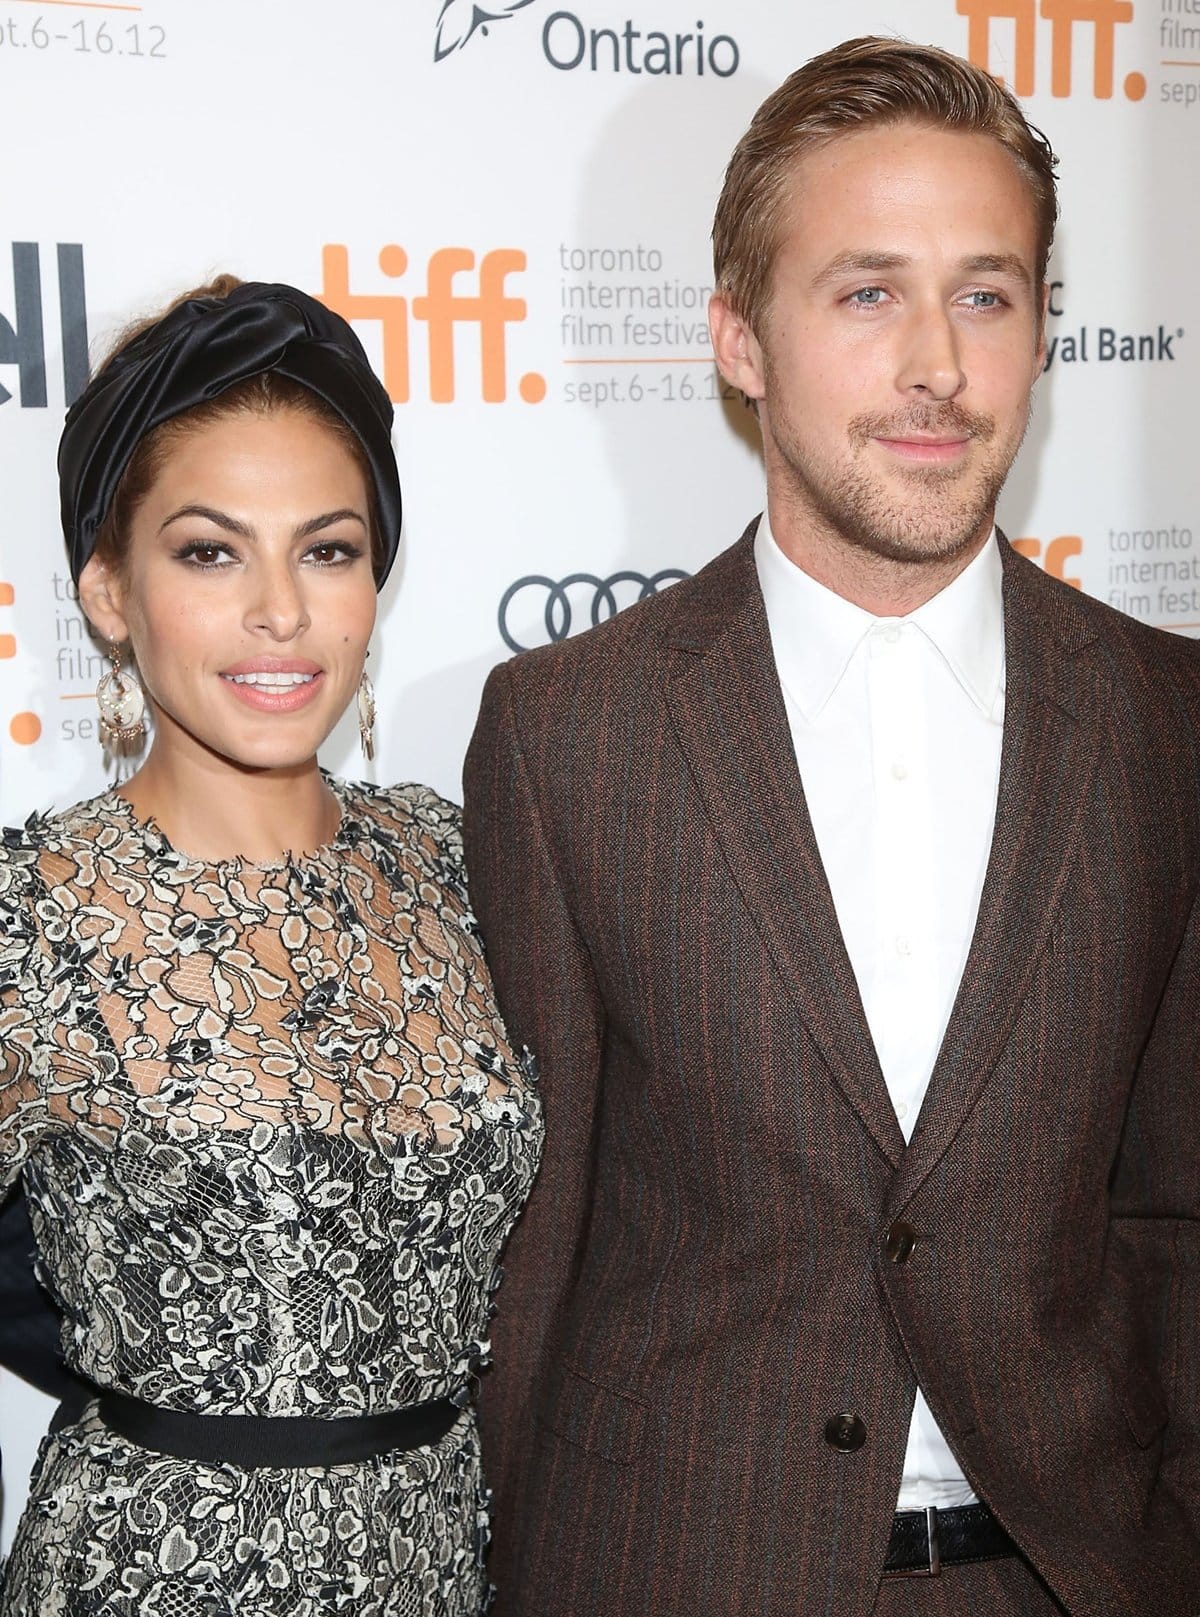 Eva Mendes is much shorter and almost 7 years older than her husband Ryan Gosling